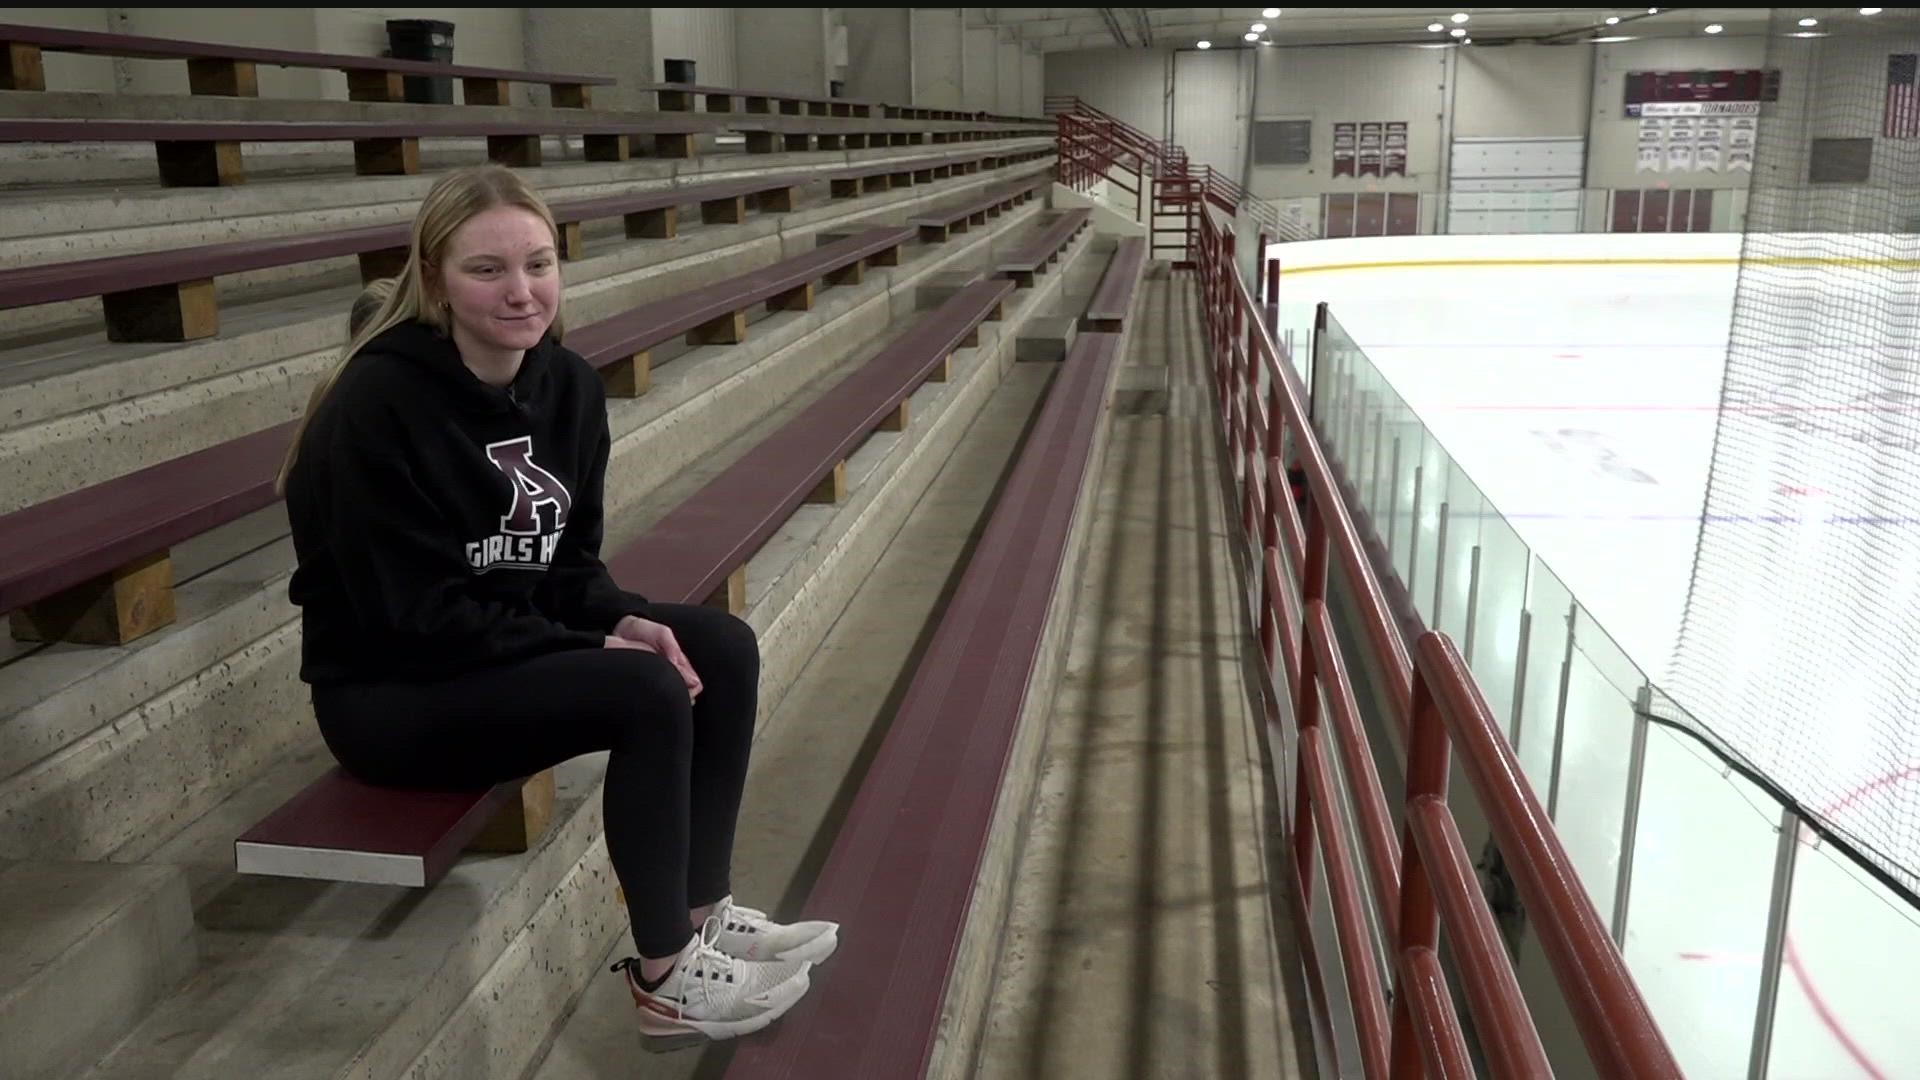 Gretchen Paaverud is a junior at Anoka Highschool who hopes to play hockey in college.